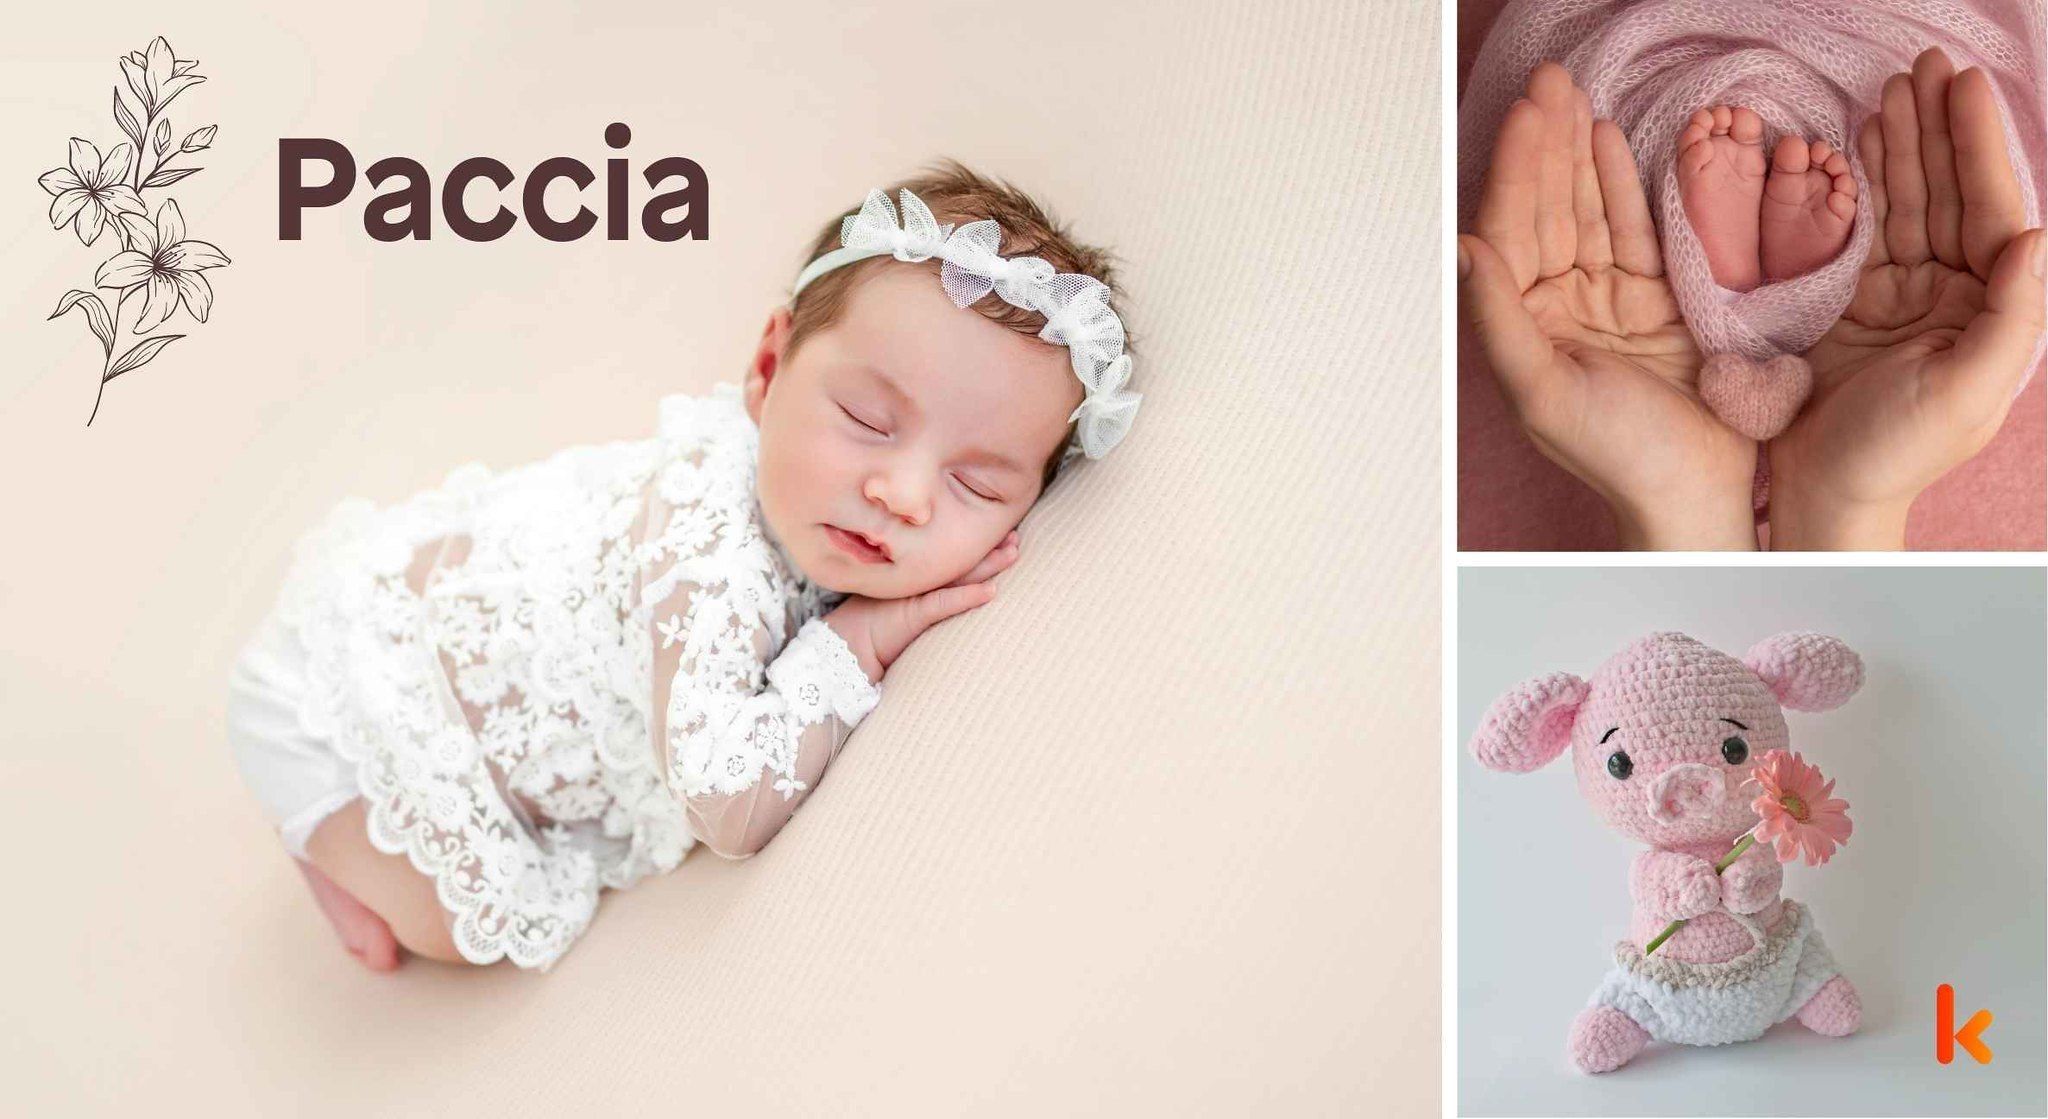 Meaning of the name Paccia